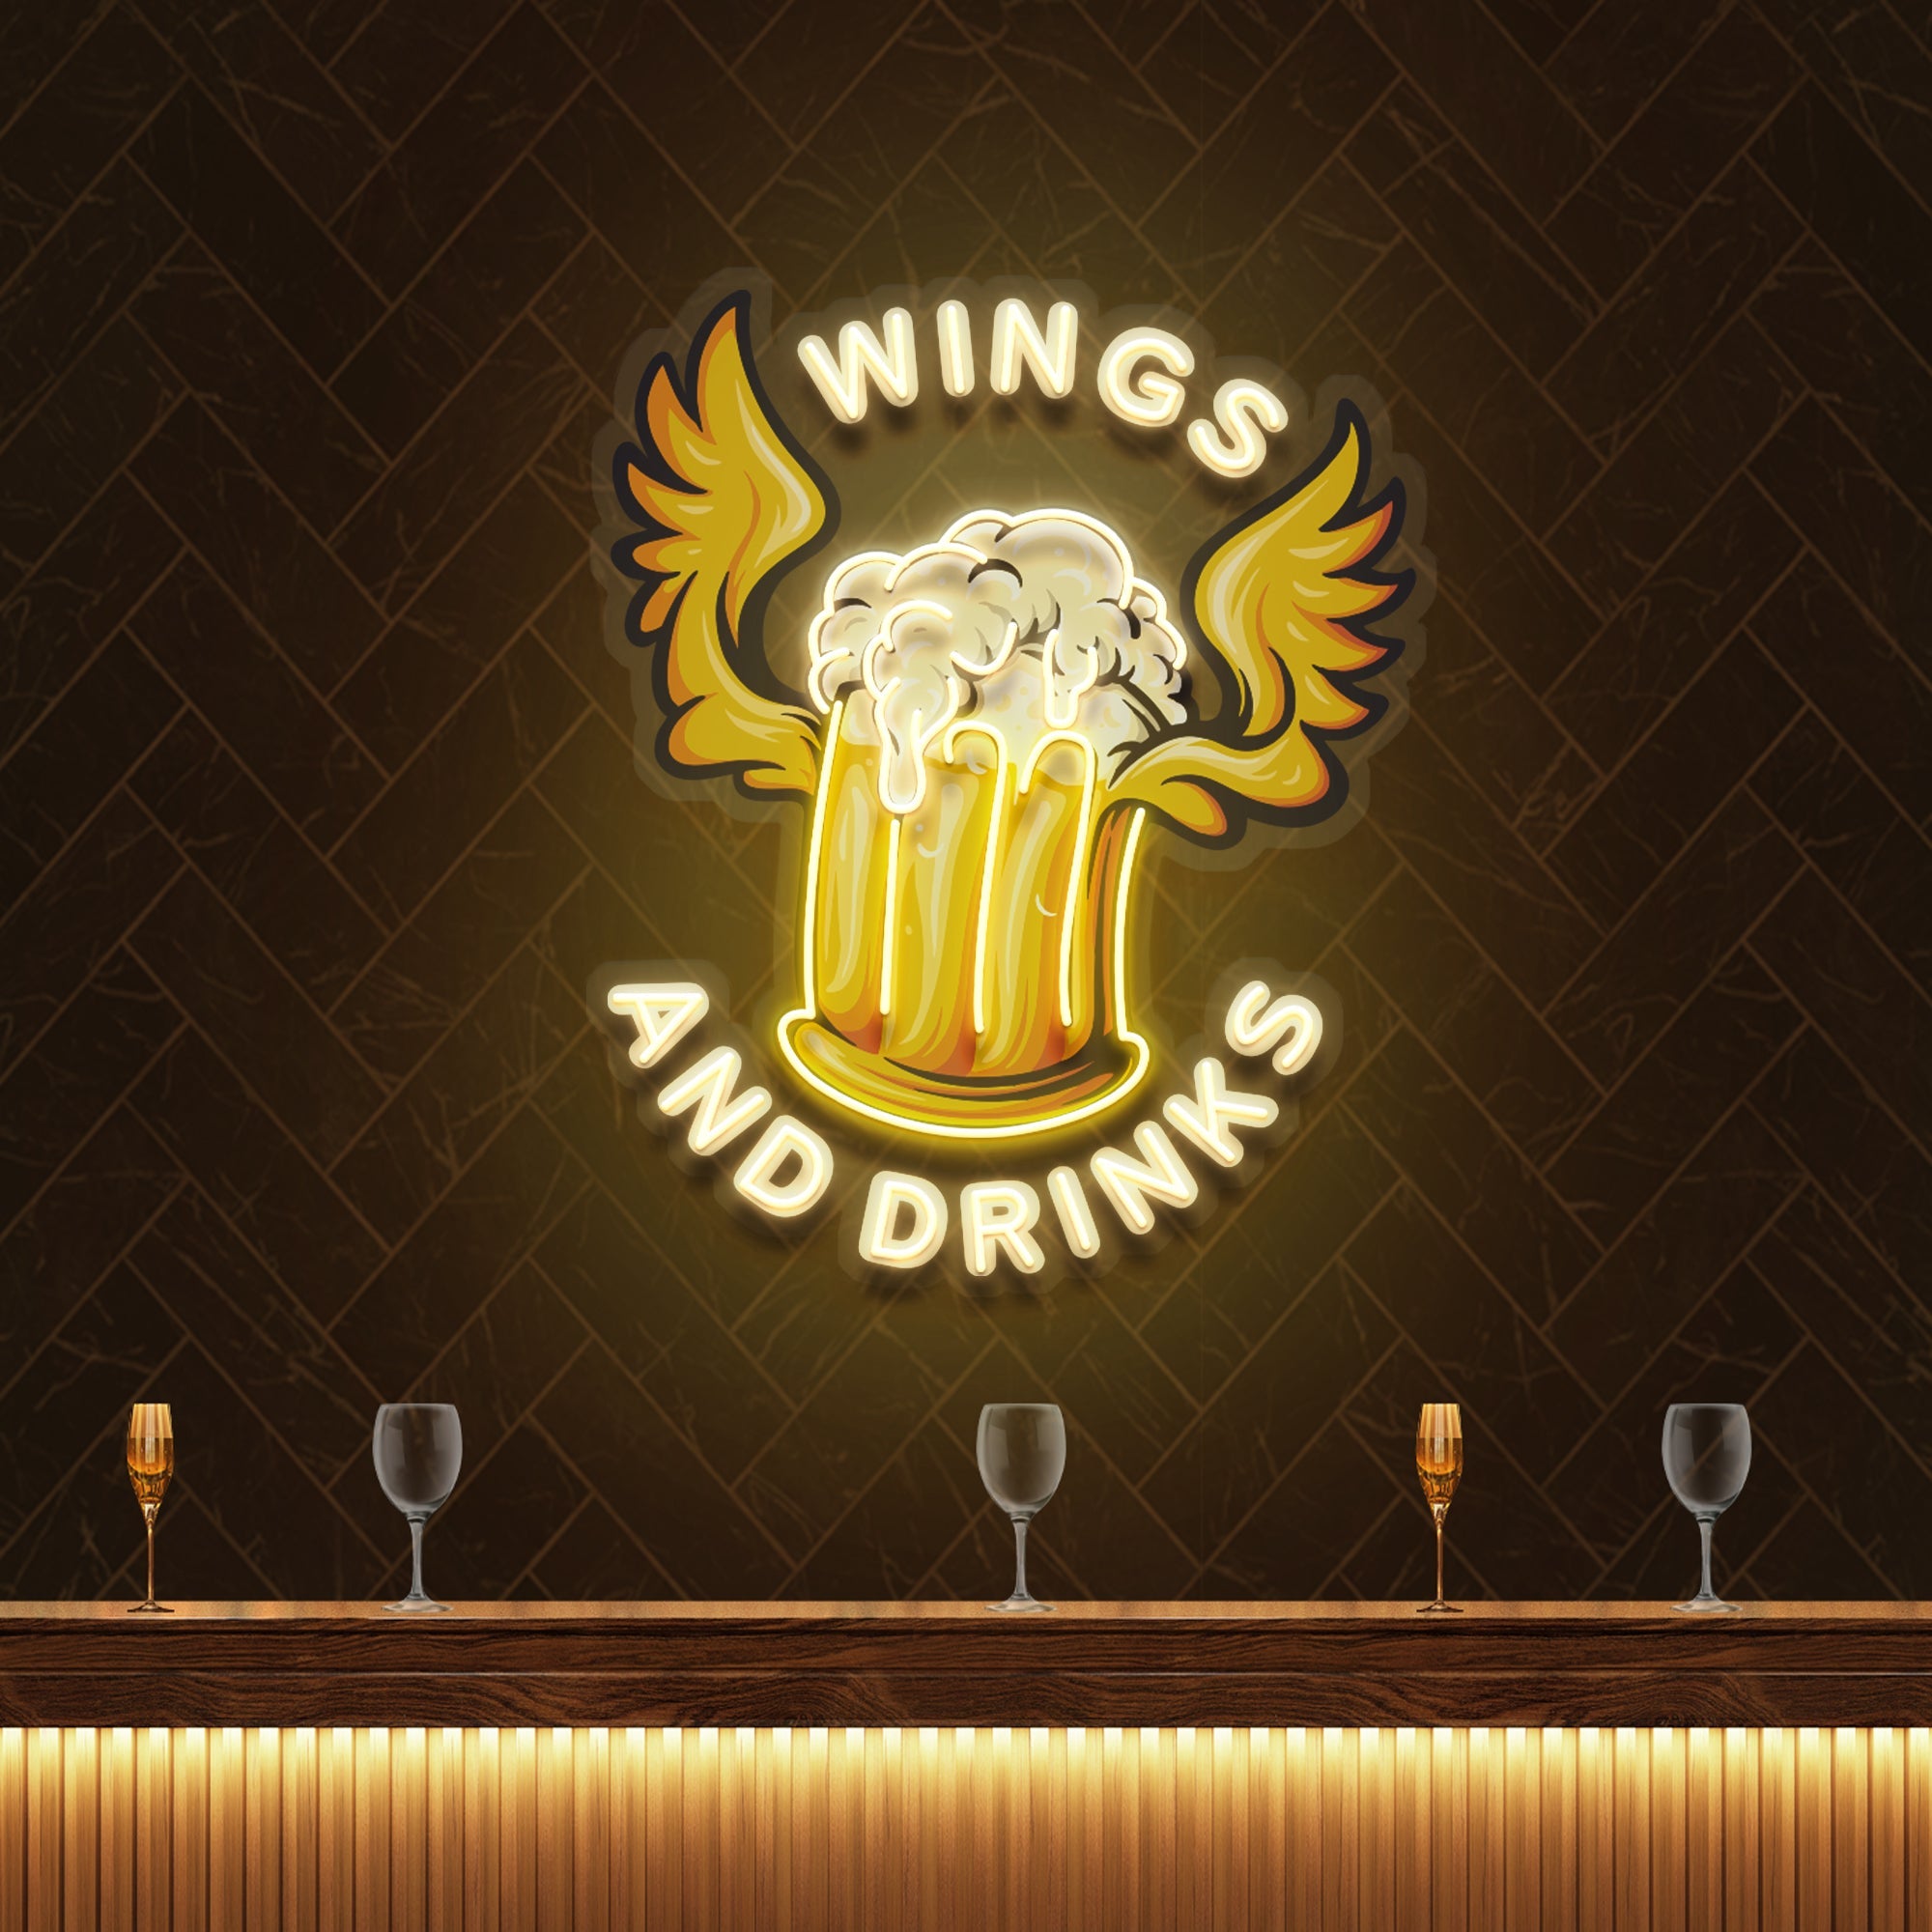 Beer Drinks and Wings Mascot Artwork Led Neon Sign Light - Neonbir